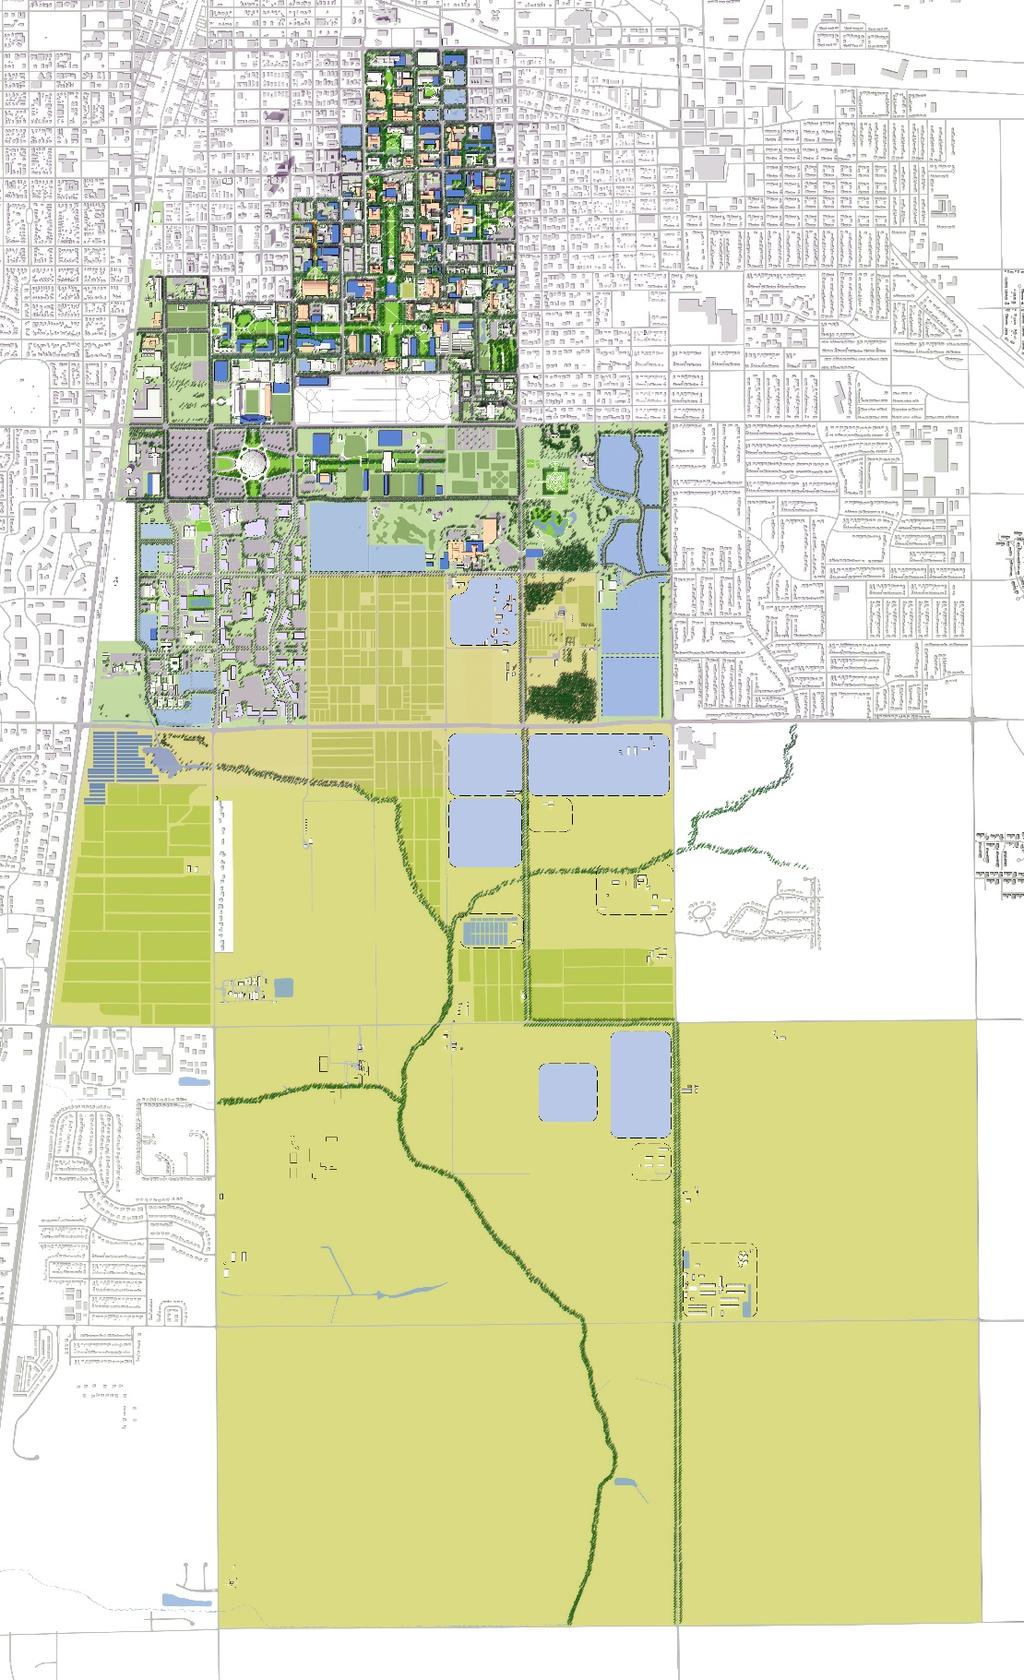 Wright St Lincoln Avenue Area of Enlargement Springfield Green St Florida Green 4 th St Kirby Springfield Ave 10 Lincoln Avenue 2017 Campus Master